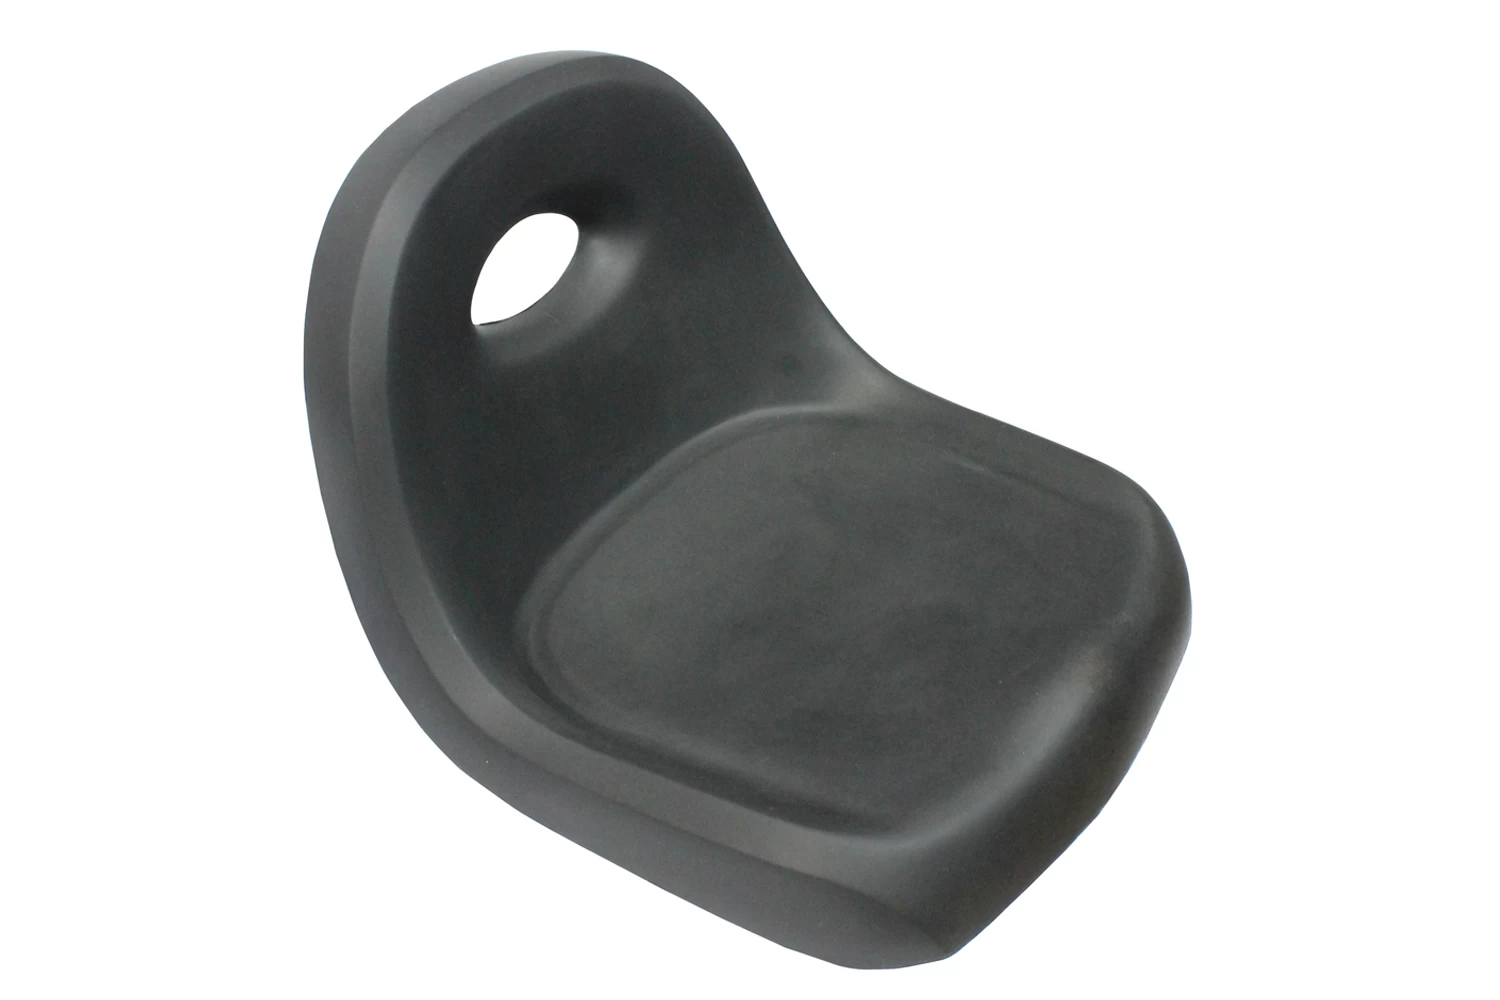 China Engineering car PU accessories， Engineering car seat, Engineering PU seat, PU seat,PU cushion manufacturer